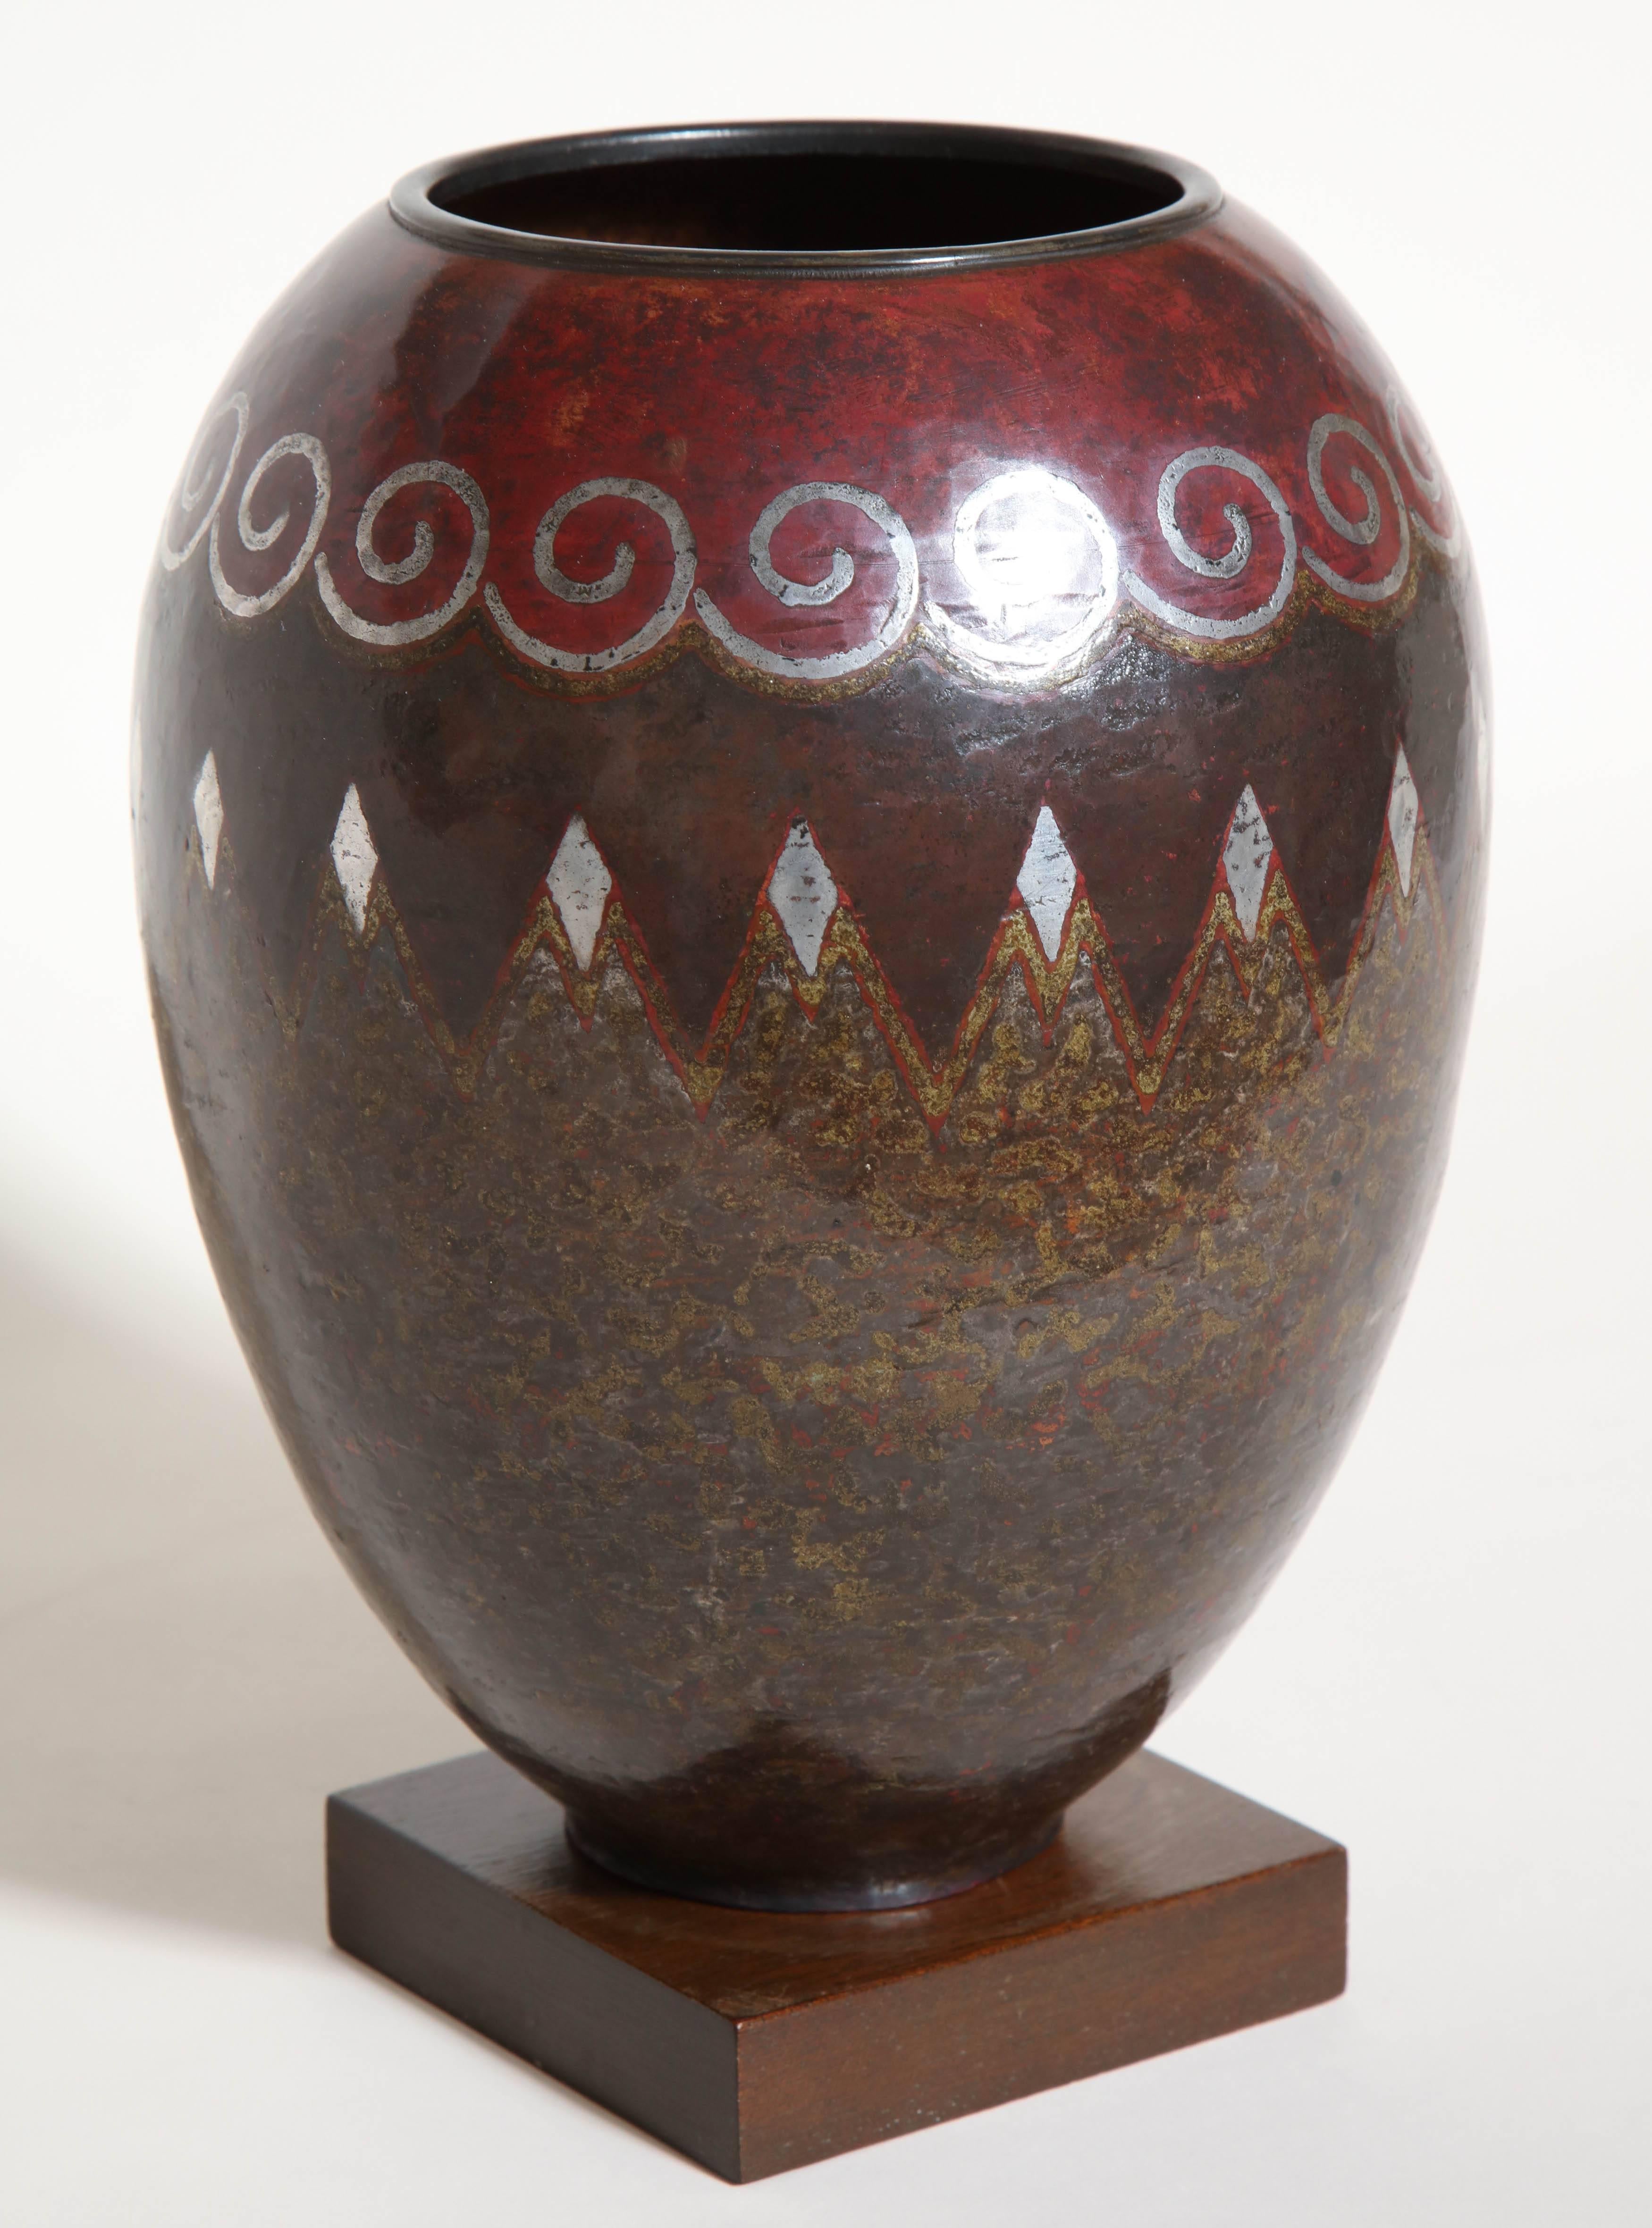 8 3/4'' high; 6 7/8'' wide
9 1/2'' high on oak base

This tall ovoid vase with annular collar has fired patina and silver inlays on a background, also patinated with fire, red in the upper part and pebbled jasper in the lower part. The vase has a